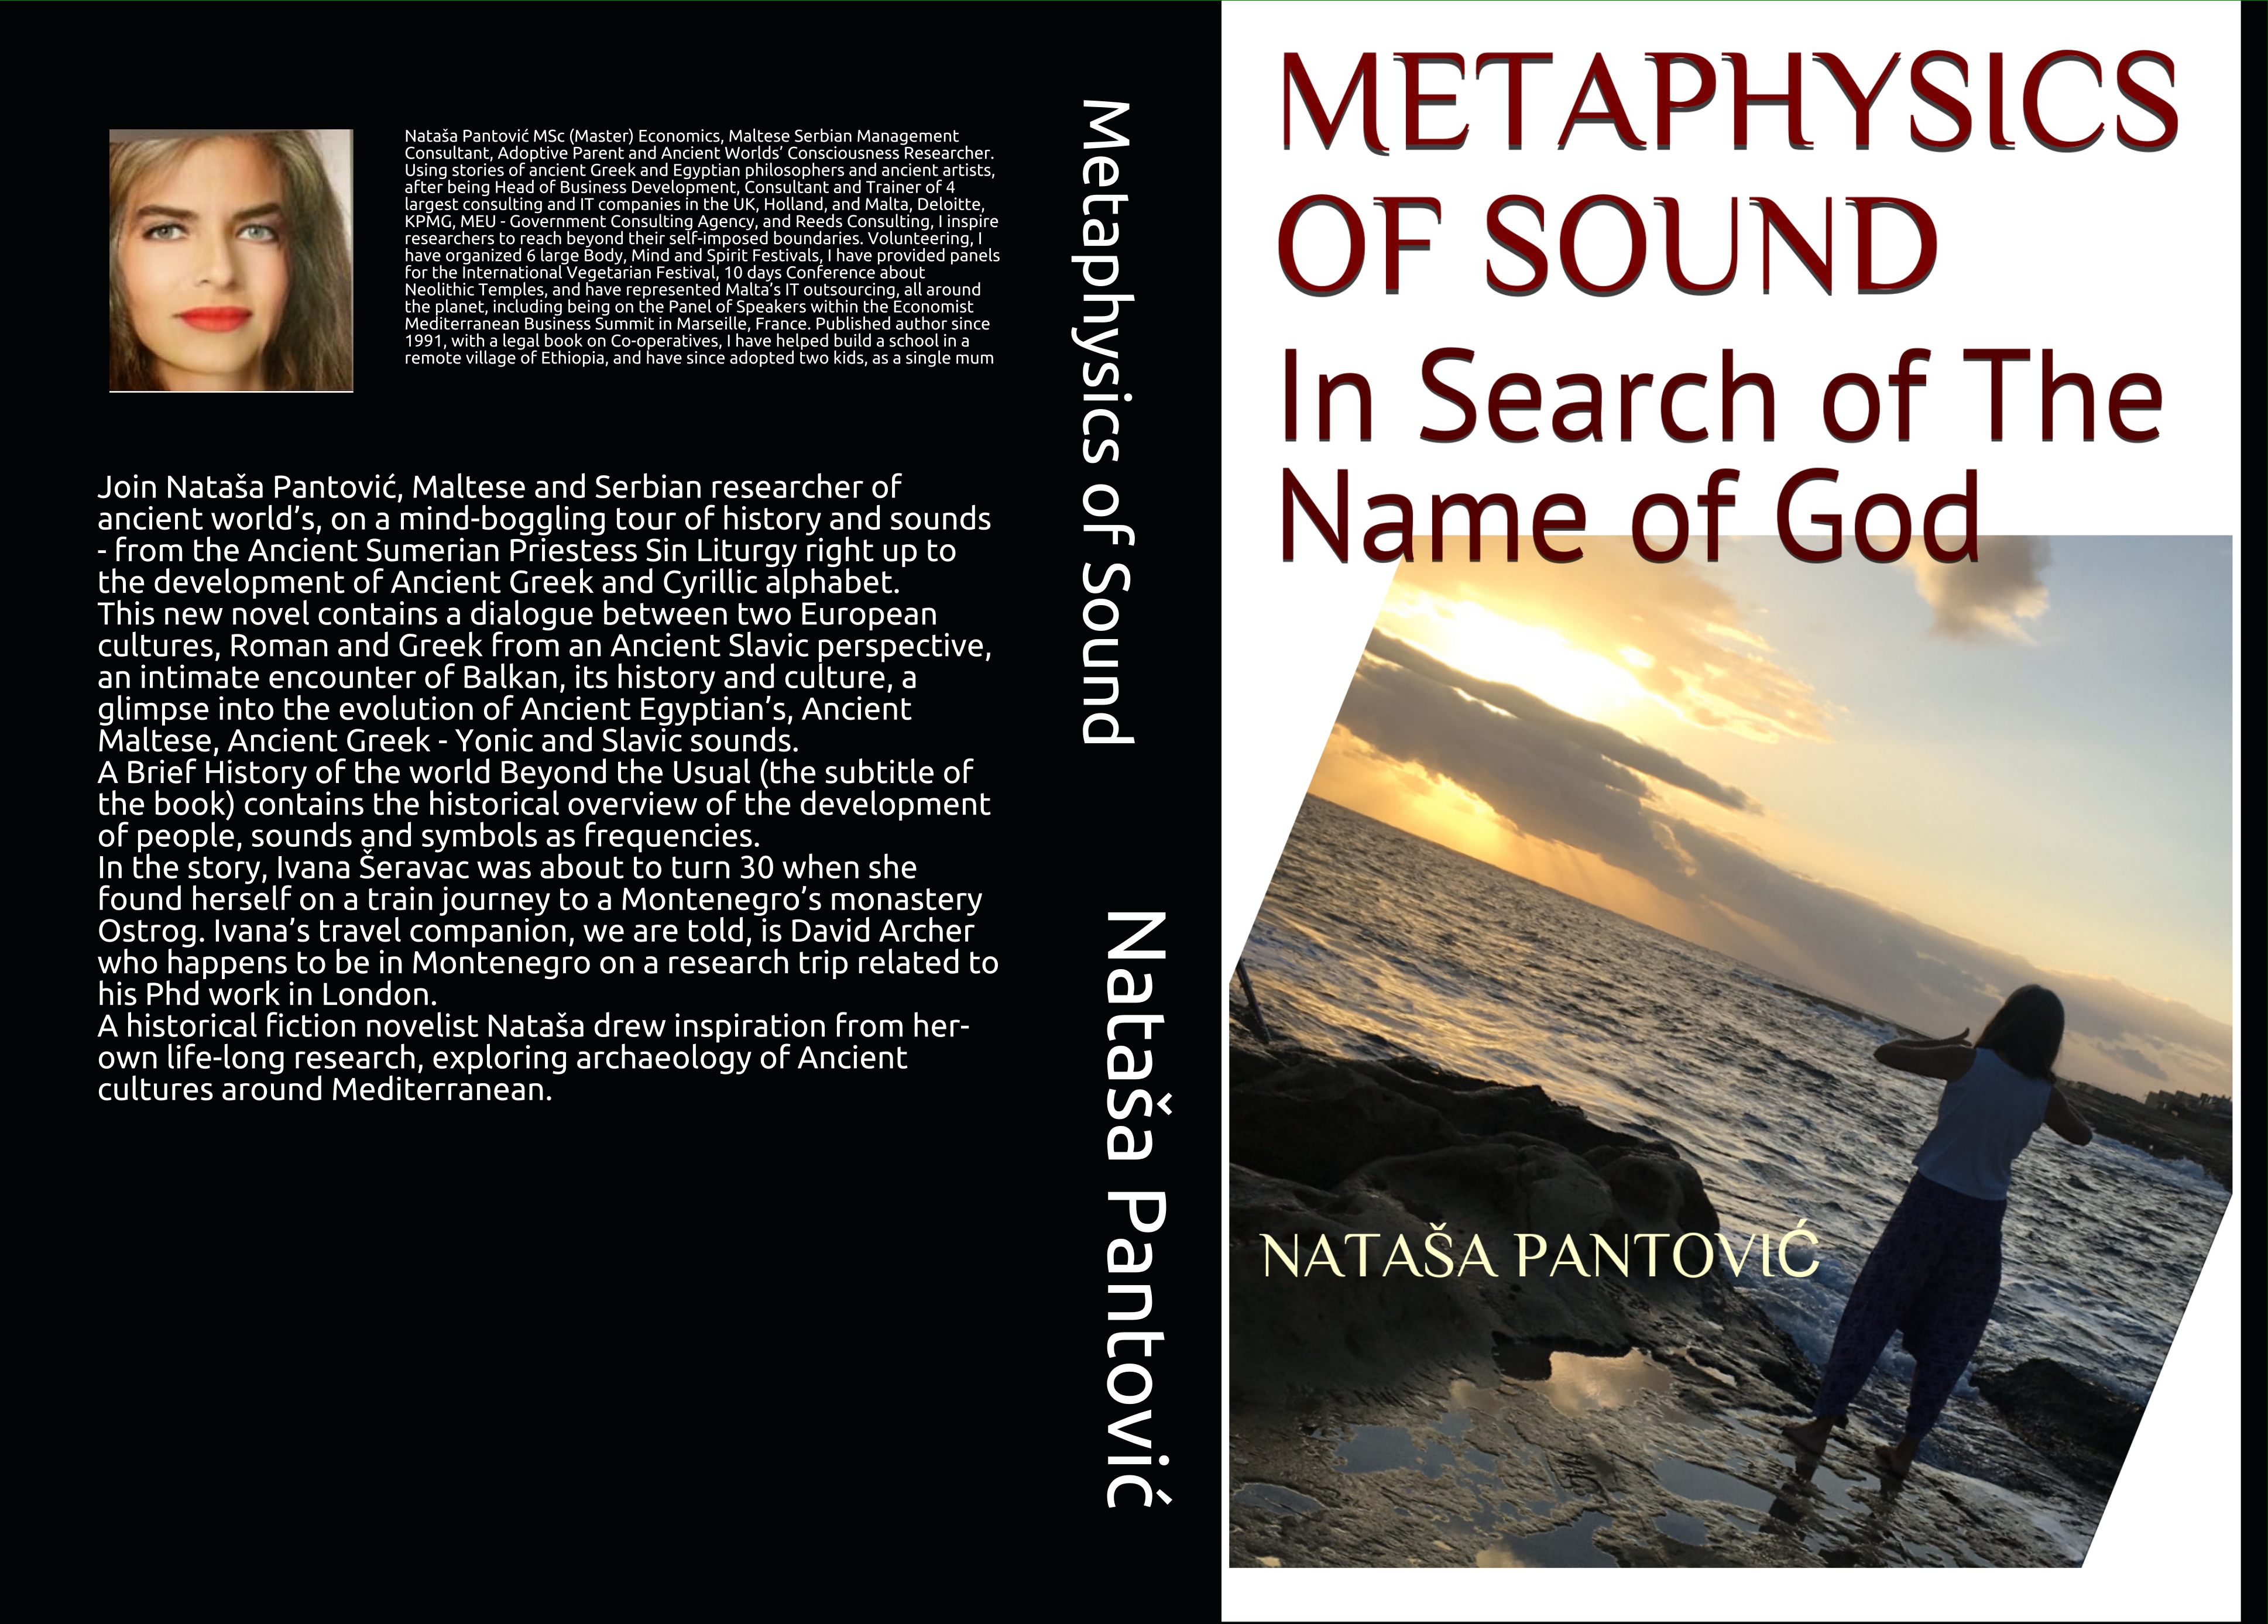 Metaphysics of Sound In Search of the Name of God or a Brief History of the World beyond the Usual by Nataša Pantović book cover